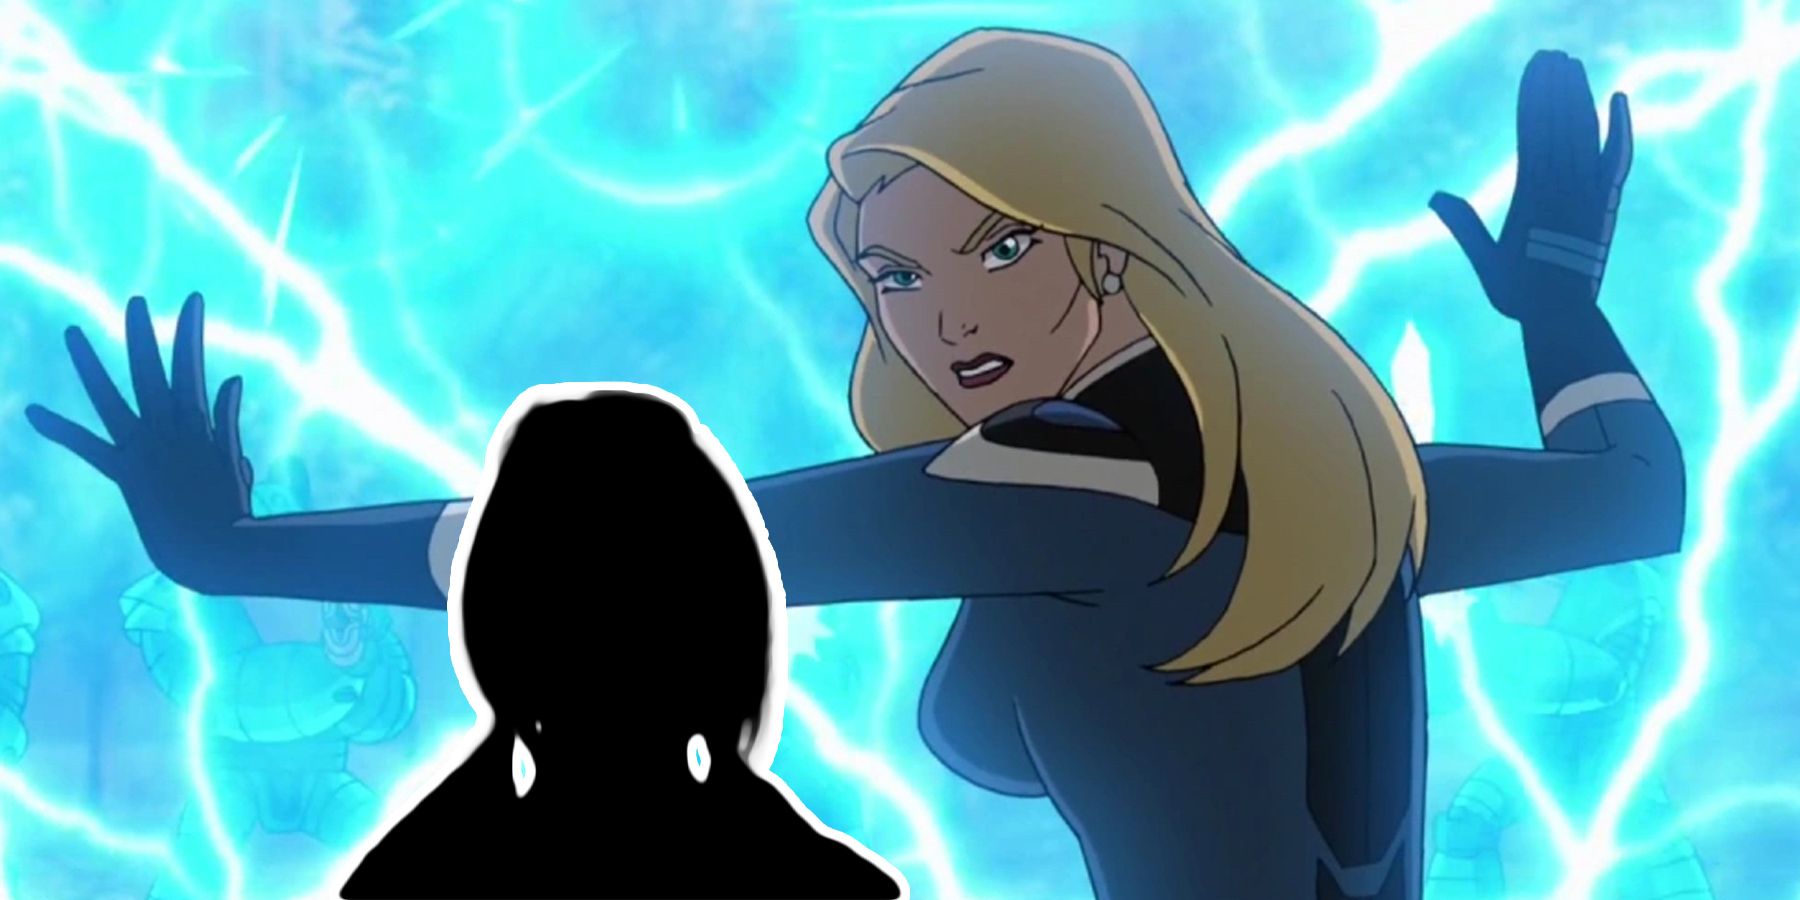 Margot Robbie Reportedly Offered Fantastic Four Reboot Sue Storm Role